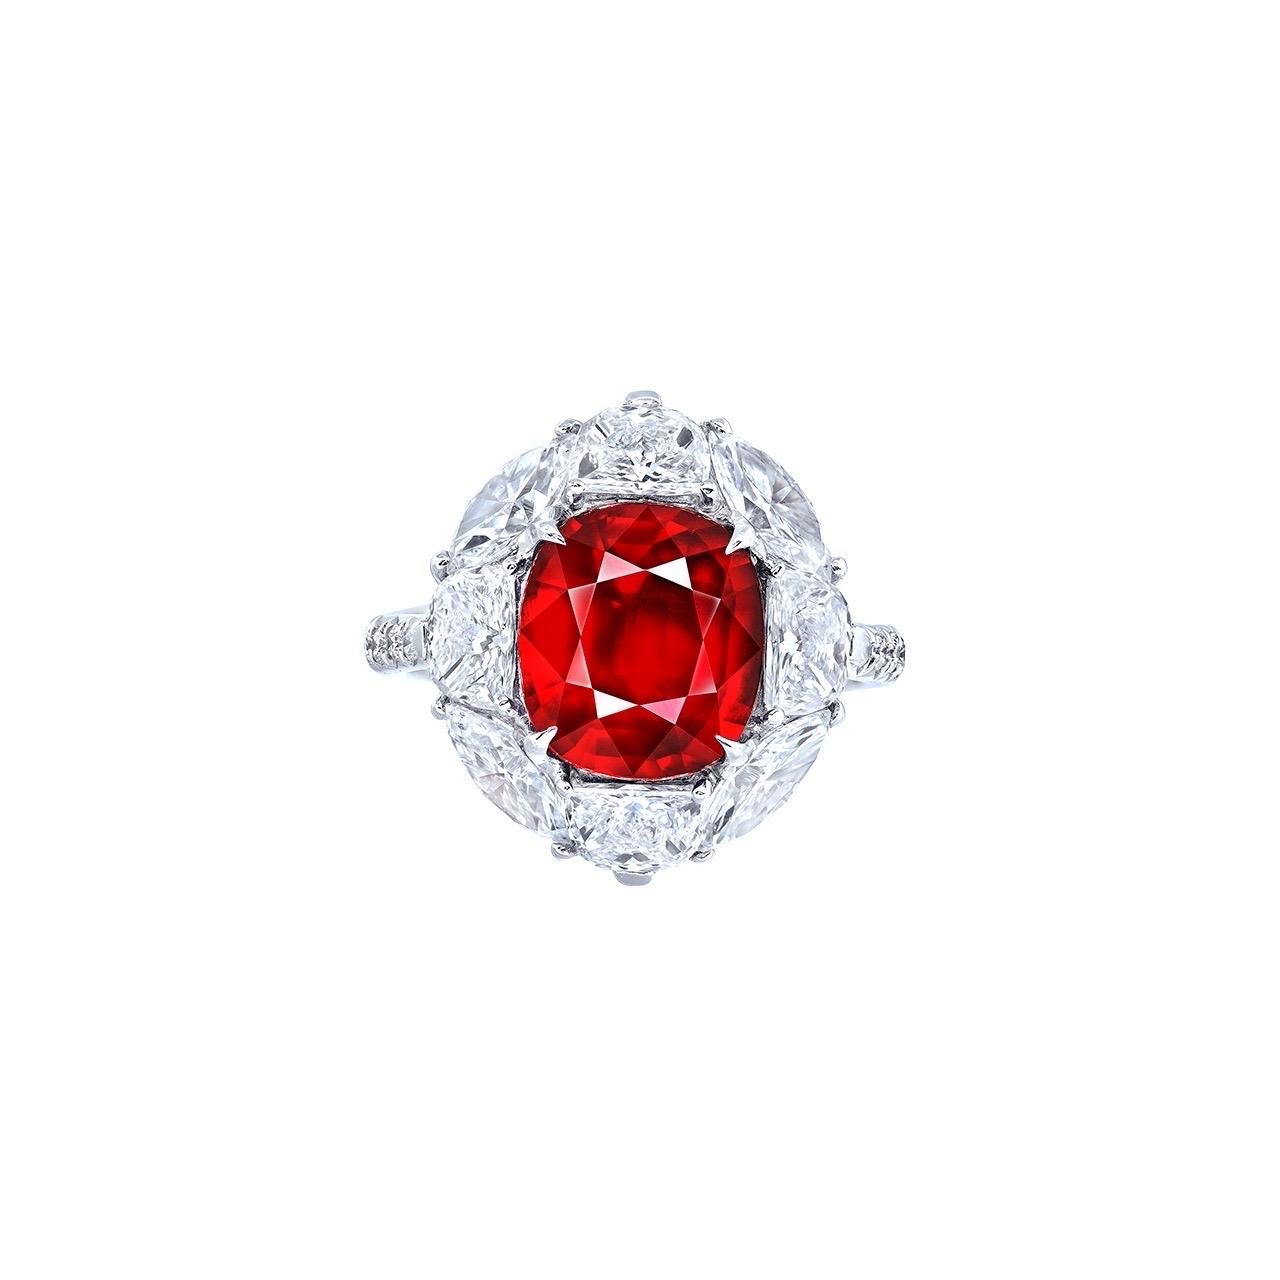 From the Museum Vault At Emilio Jewelry New York,
Center Stone: Grs certified as pigeons blood no heat mozambique origin, over 5.00 carat Vivid to Deep Red (PIGEON BLOOD) CUSHION
Setting: 4 white diamonds totaling about 1.20 carats, 4 marquise cut